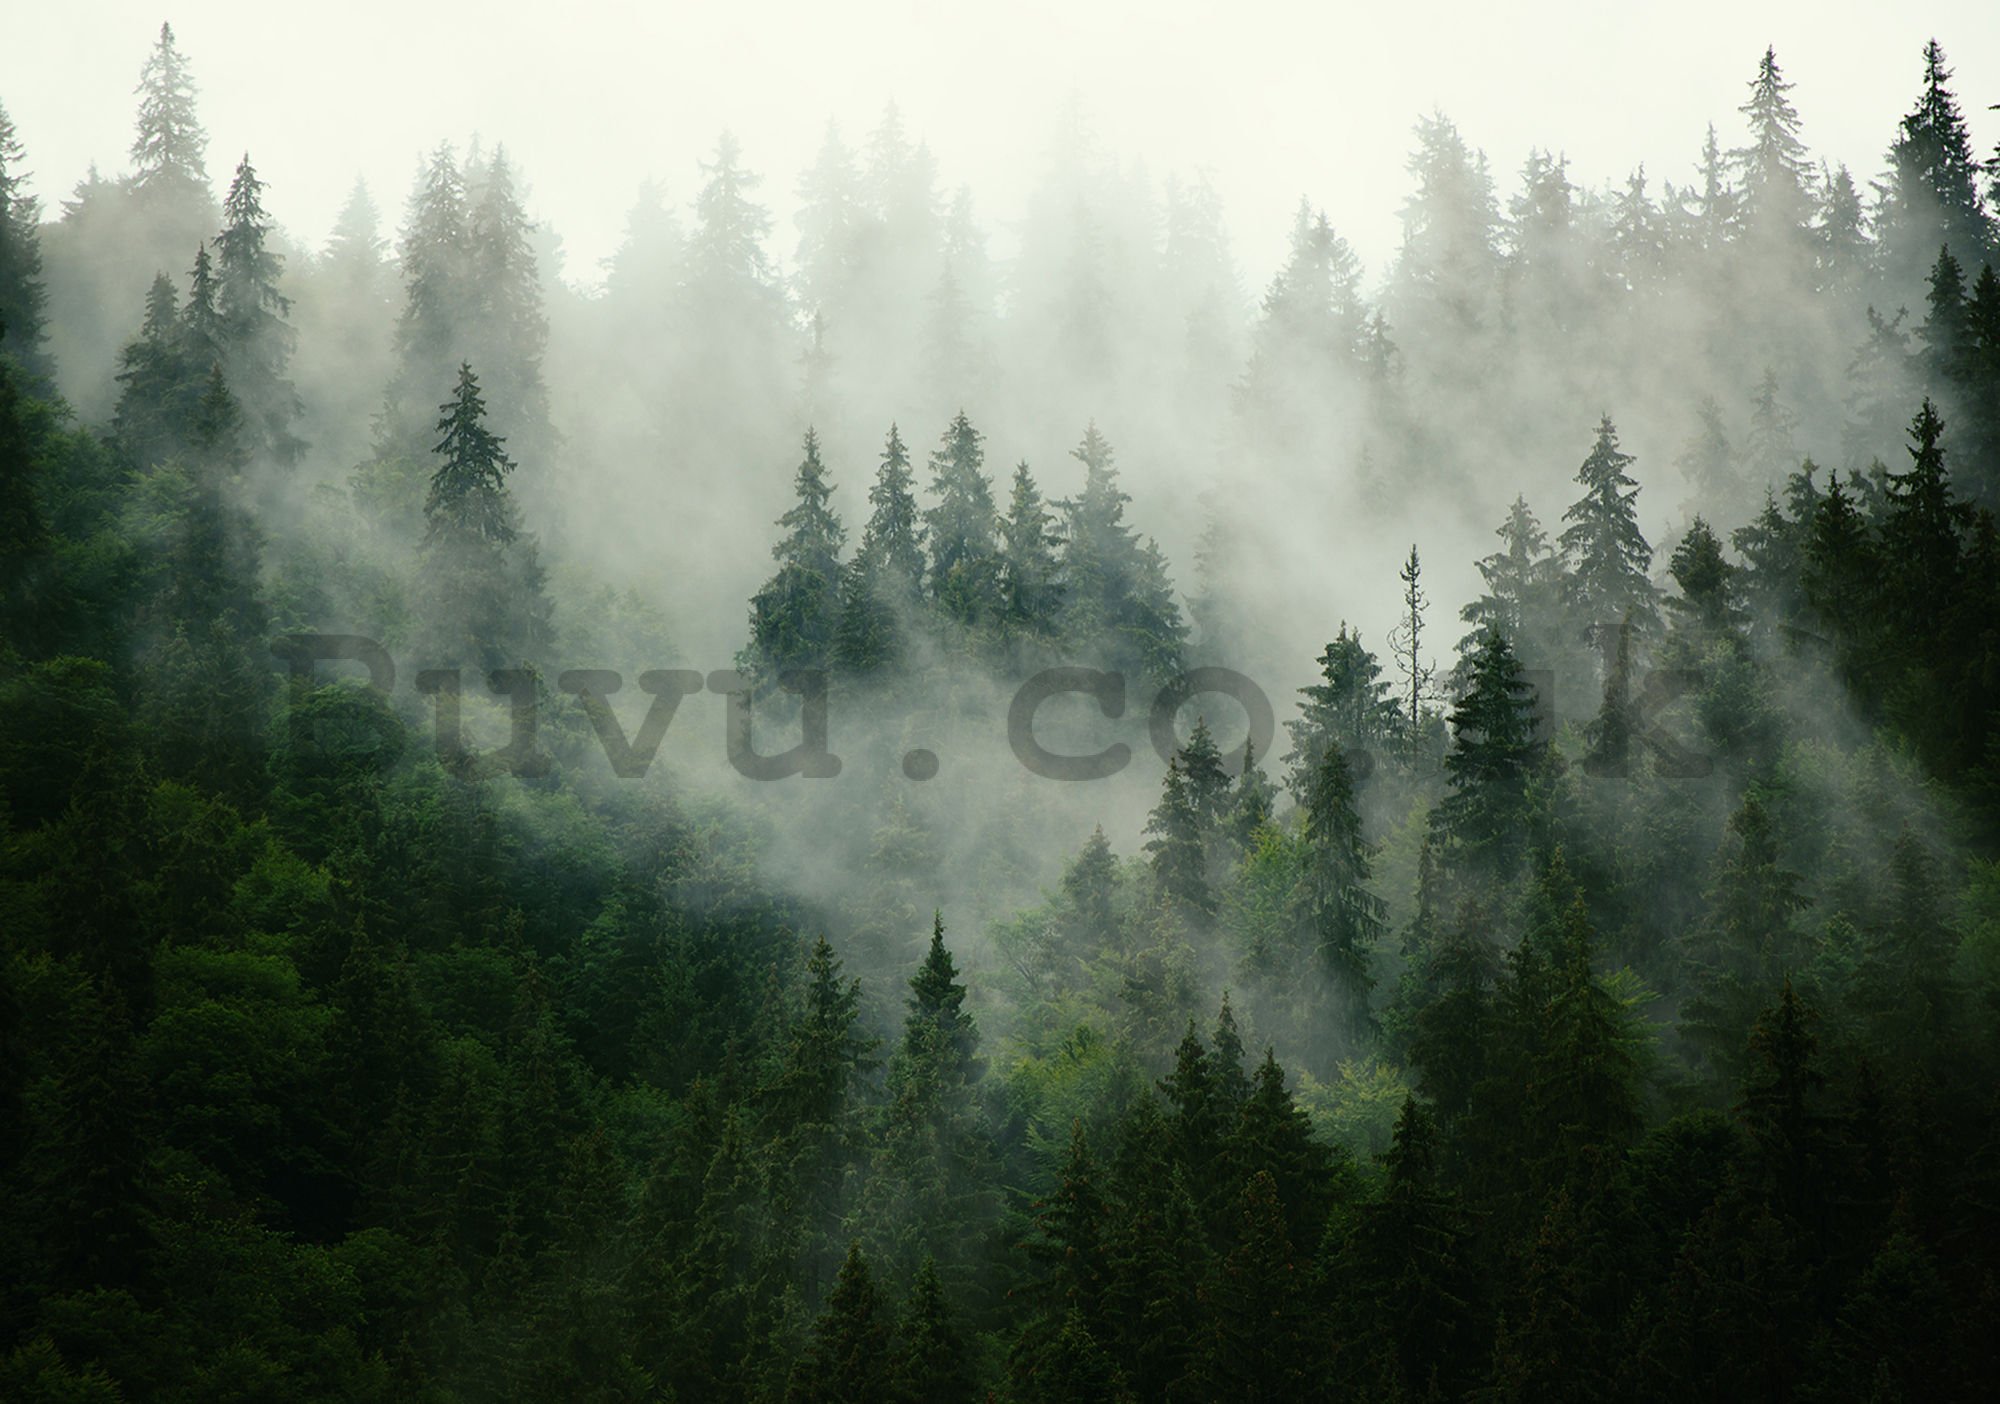 Wall mural: Fog over the forest (1) - 184x254 cm